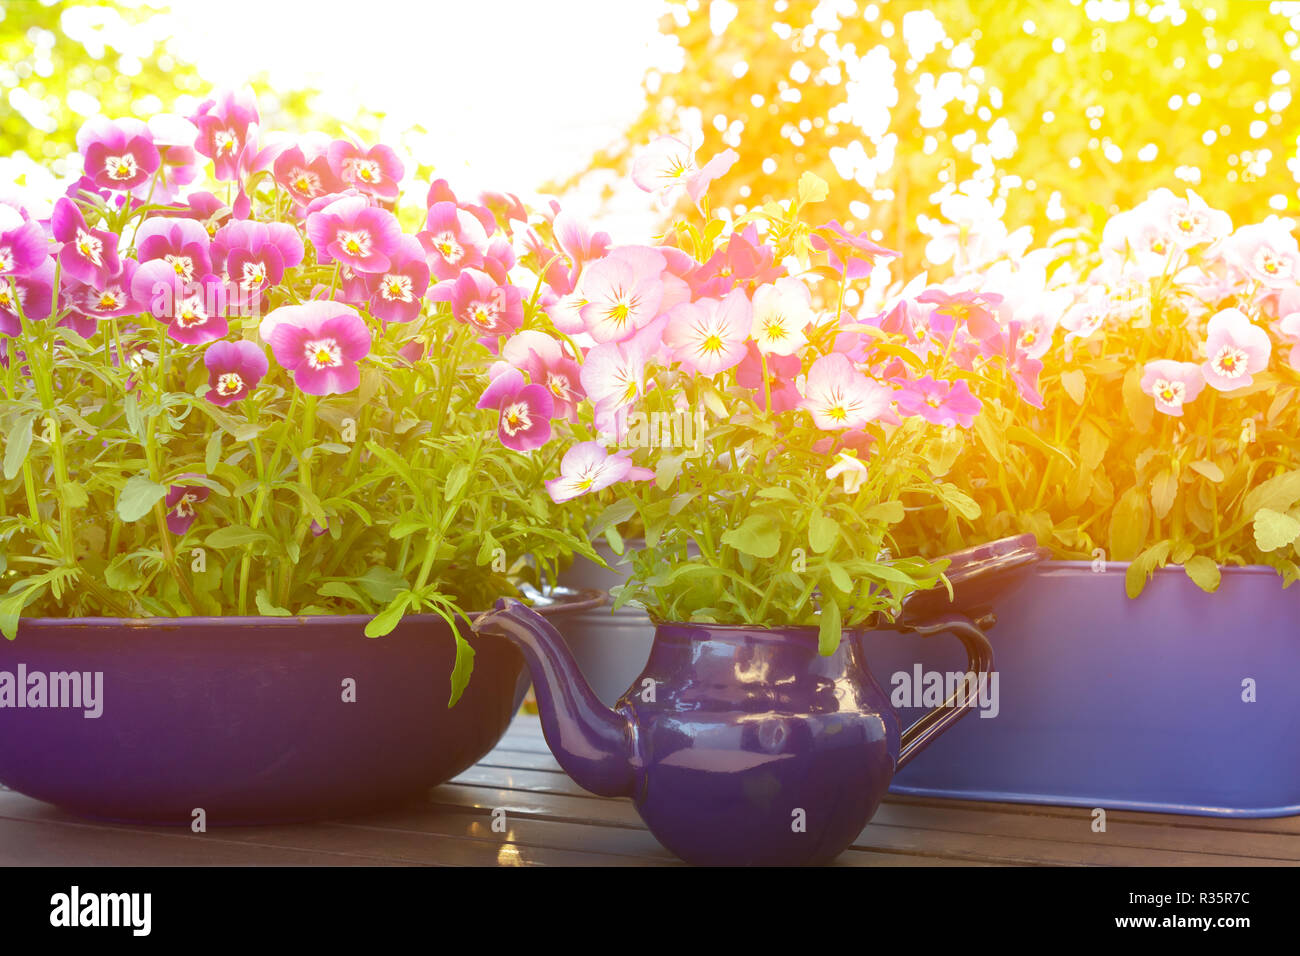 Purple, violet and blue pansy flowers in 3 different enameled pots on a balcony table in bright spring sunlight, background template Stock Photo